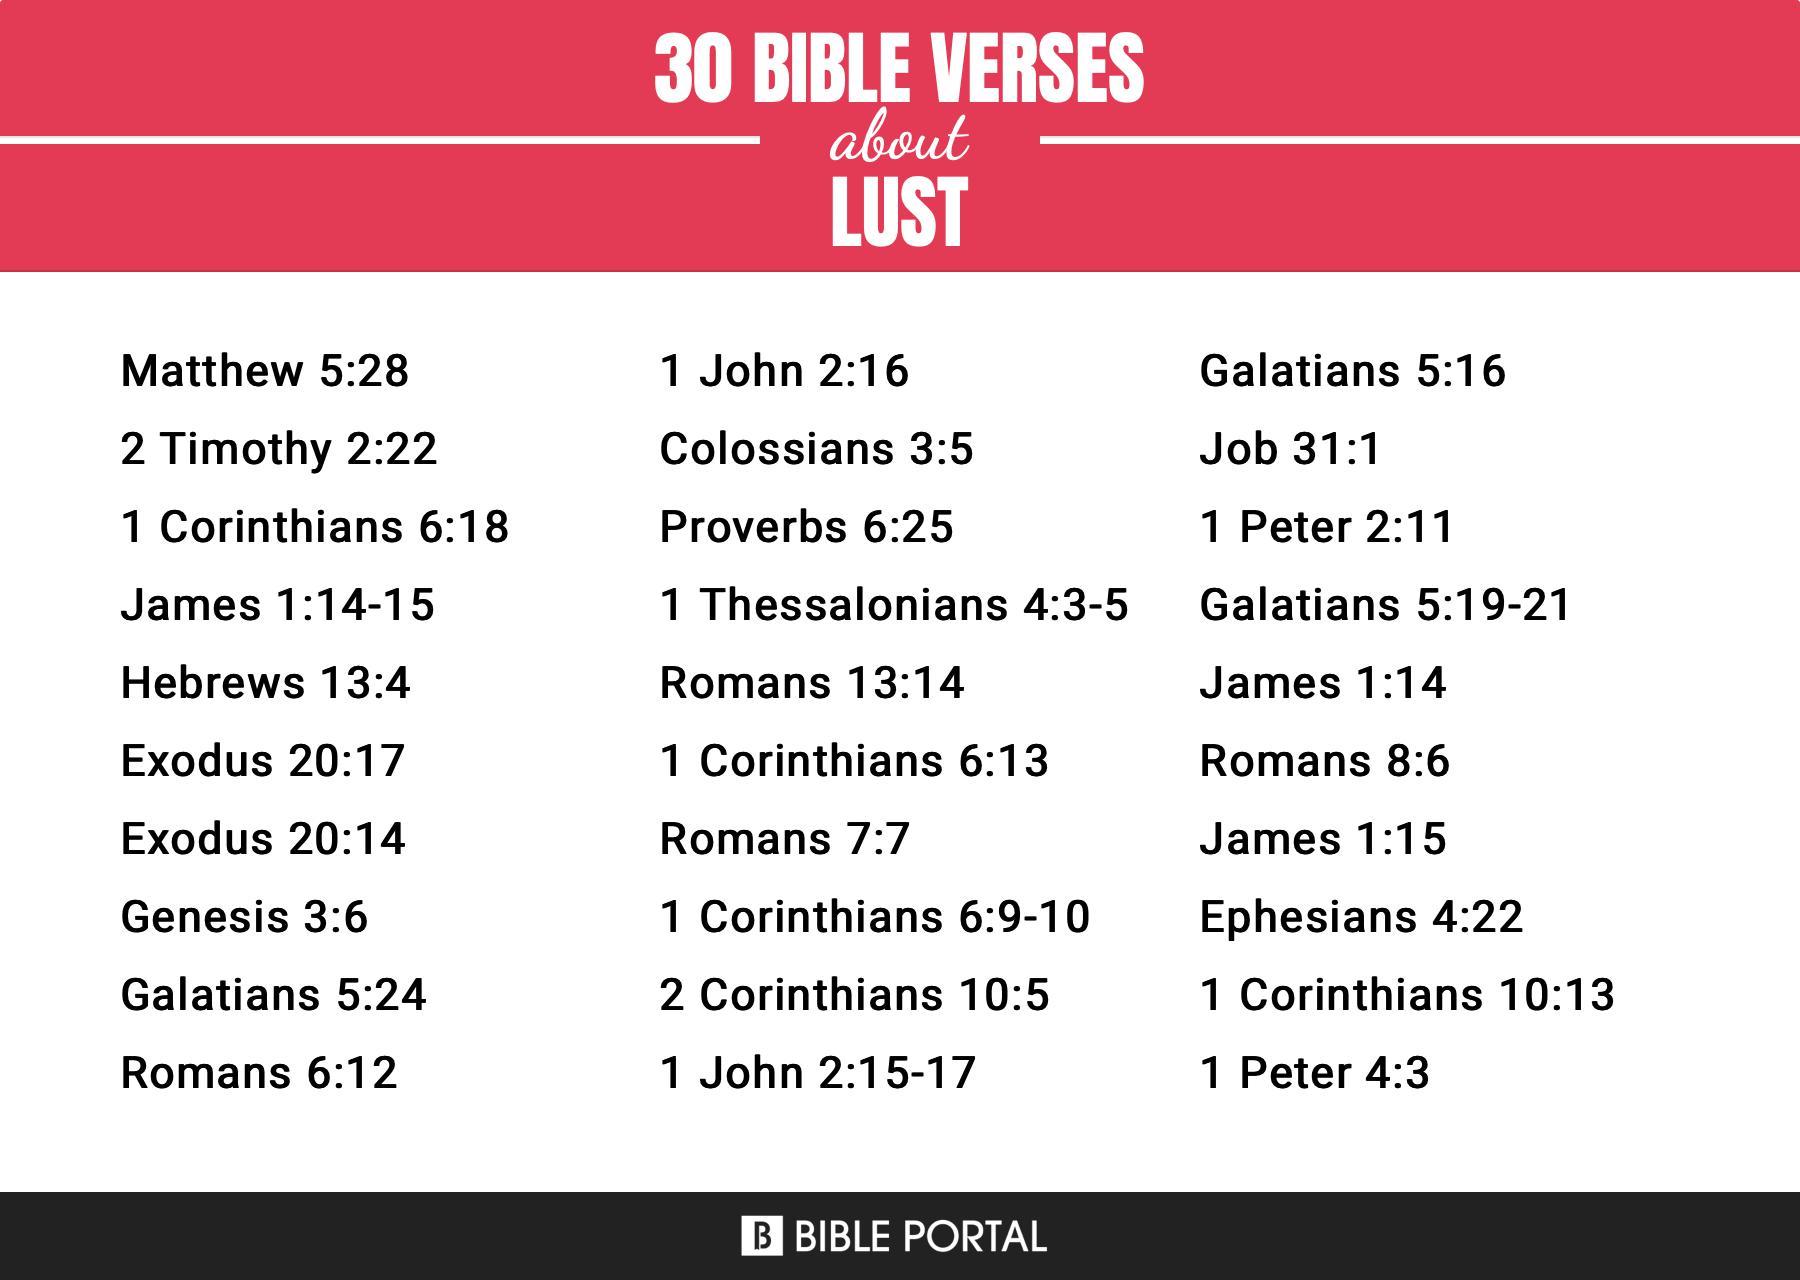 What Does the Bible Say about Lust?